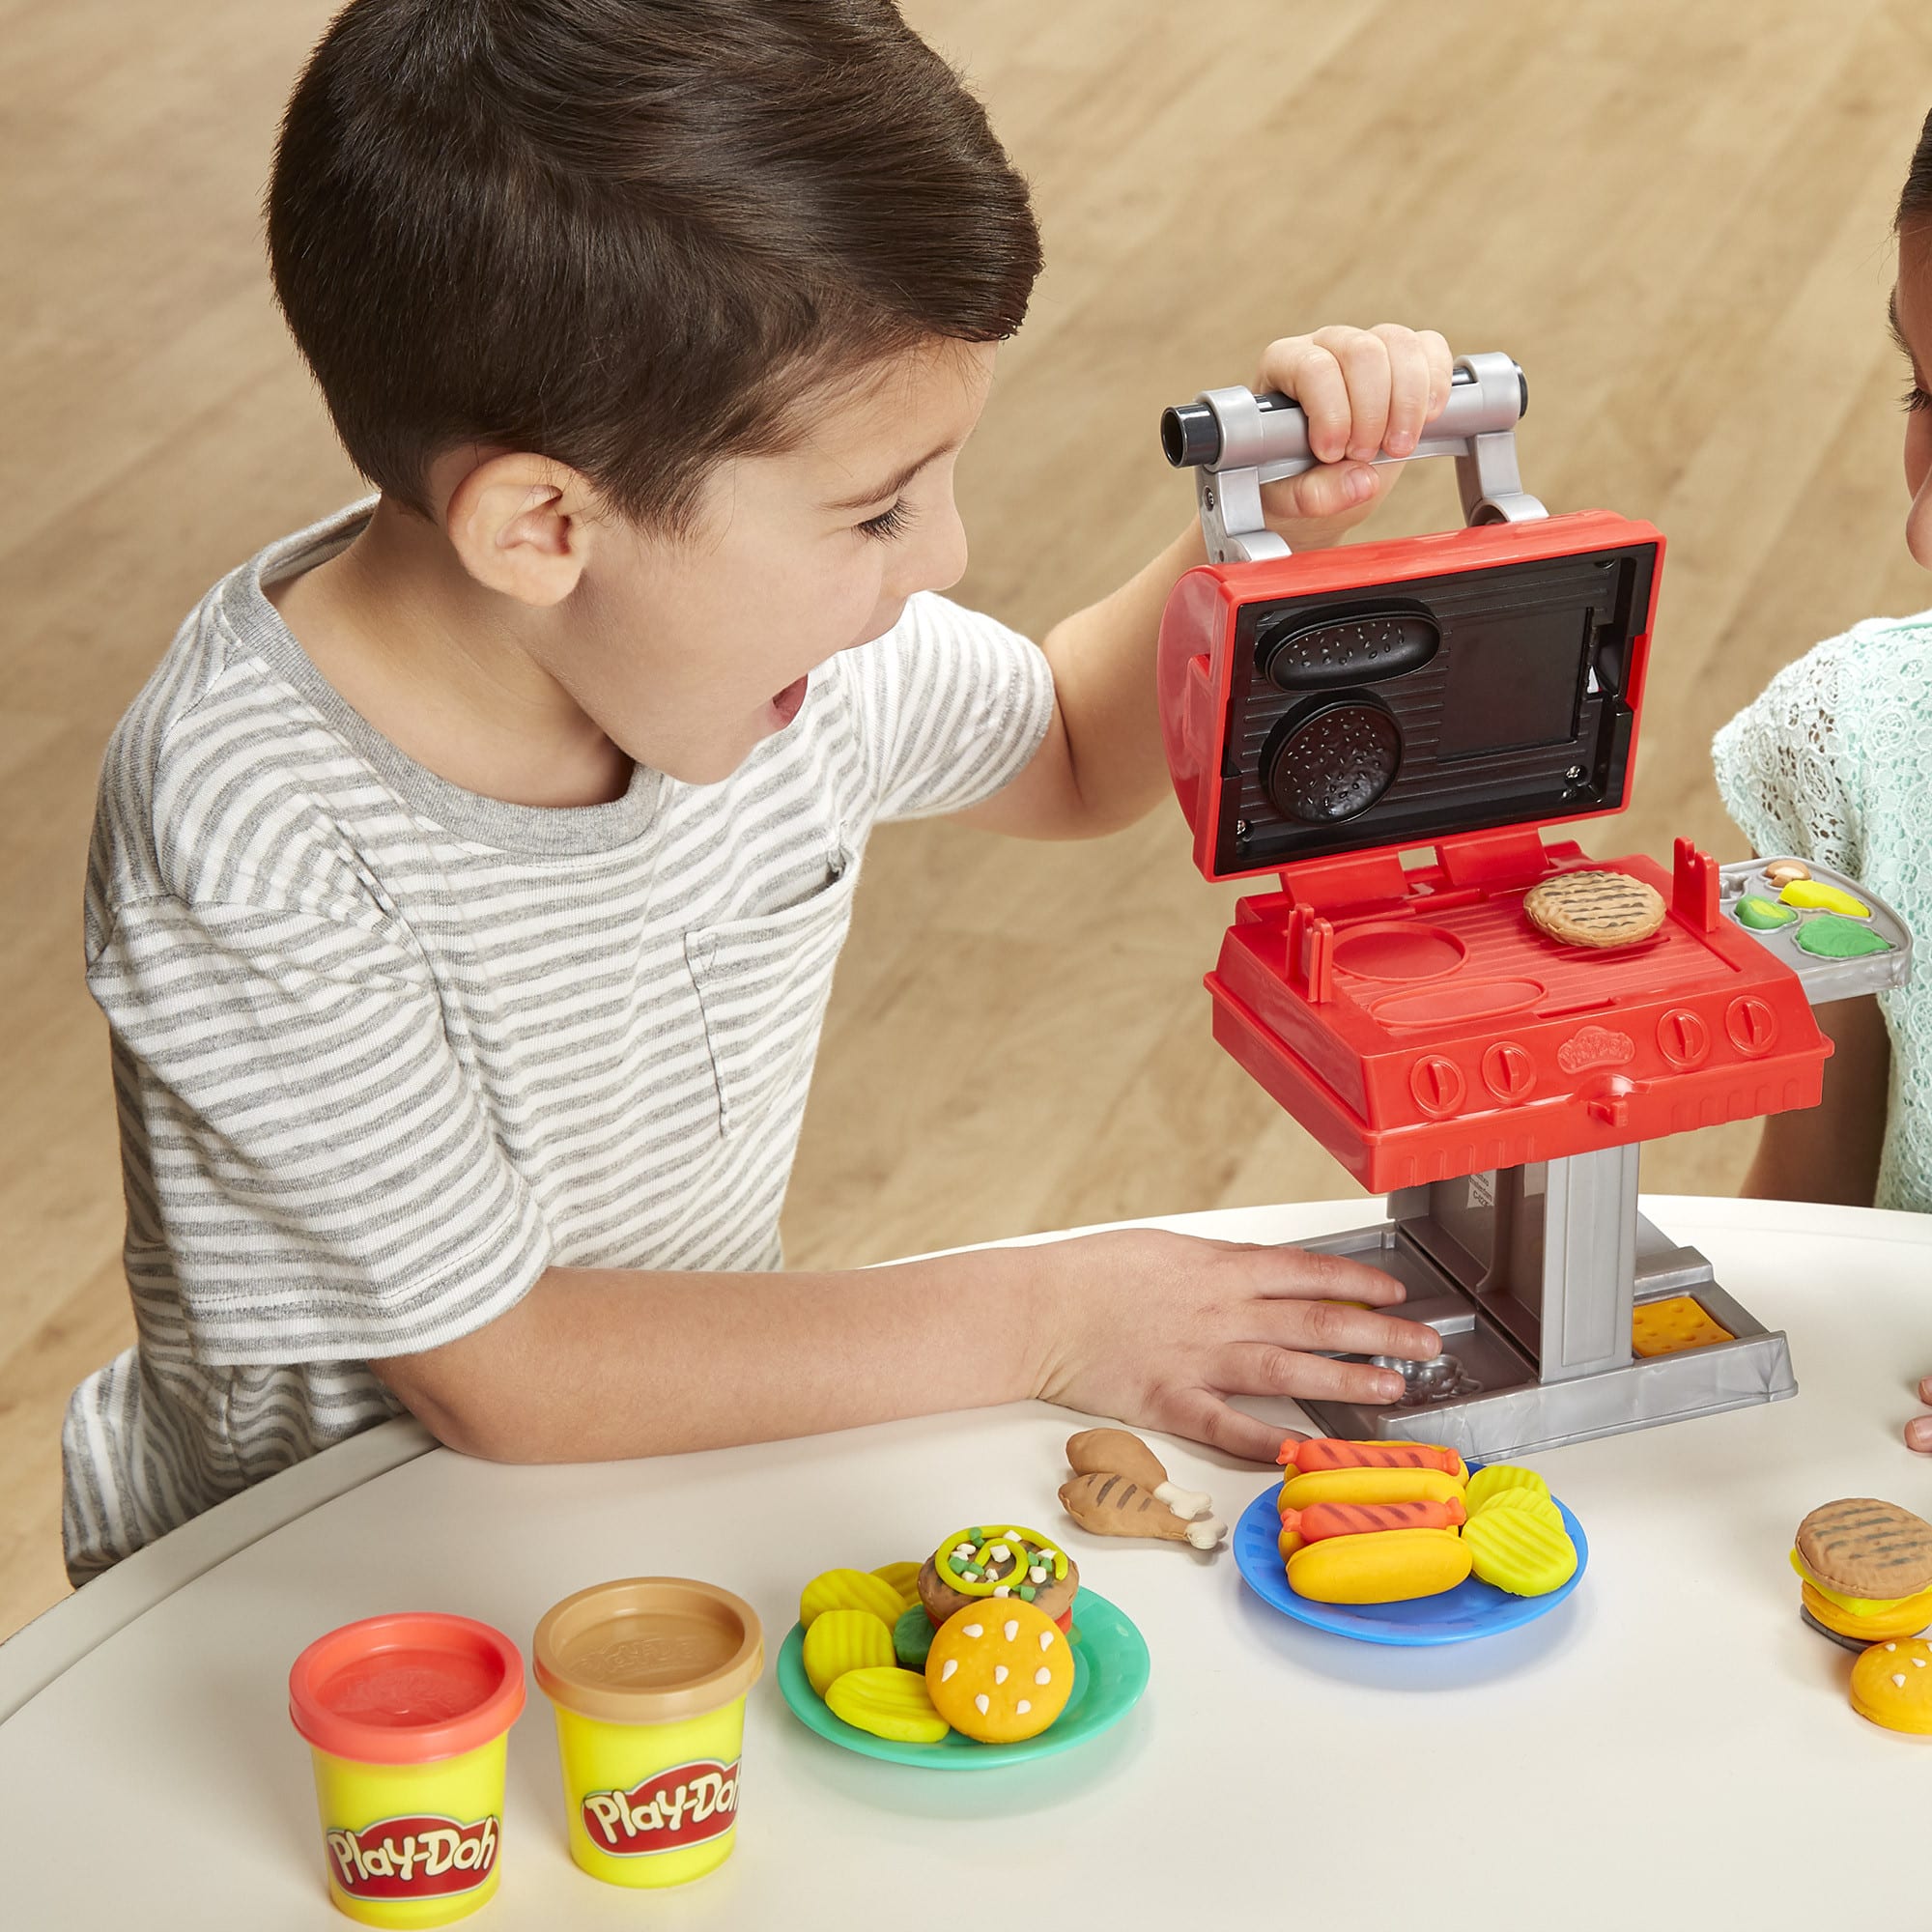 Play-Doh - Kitchen Creations - Grill 'n Stamp Playset